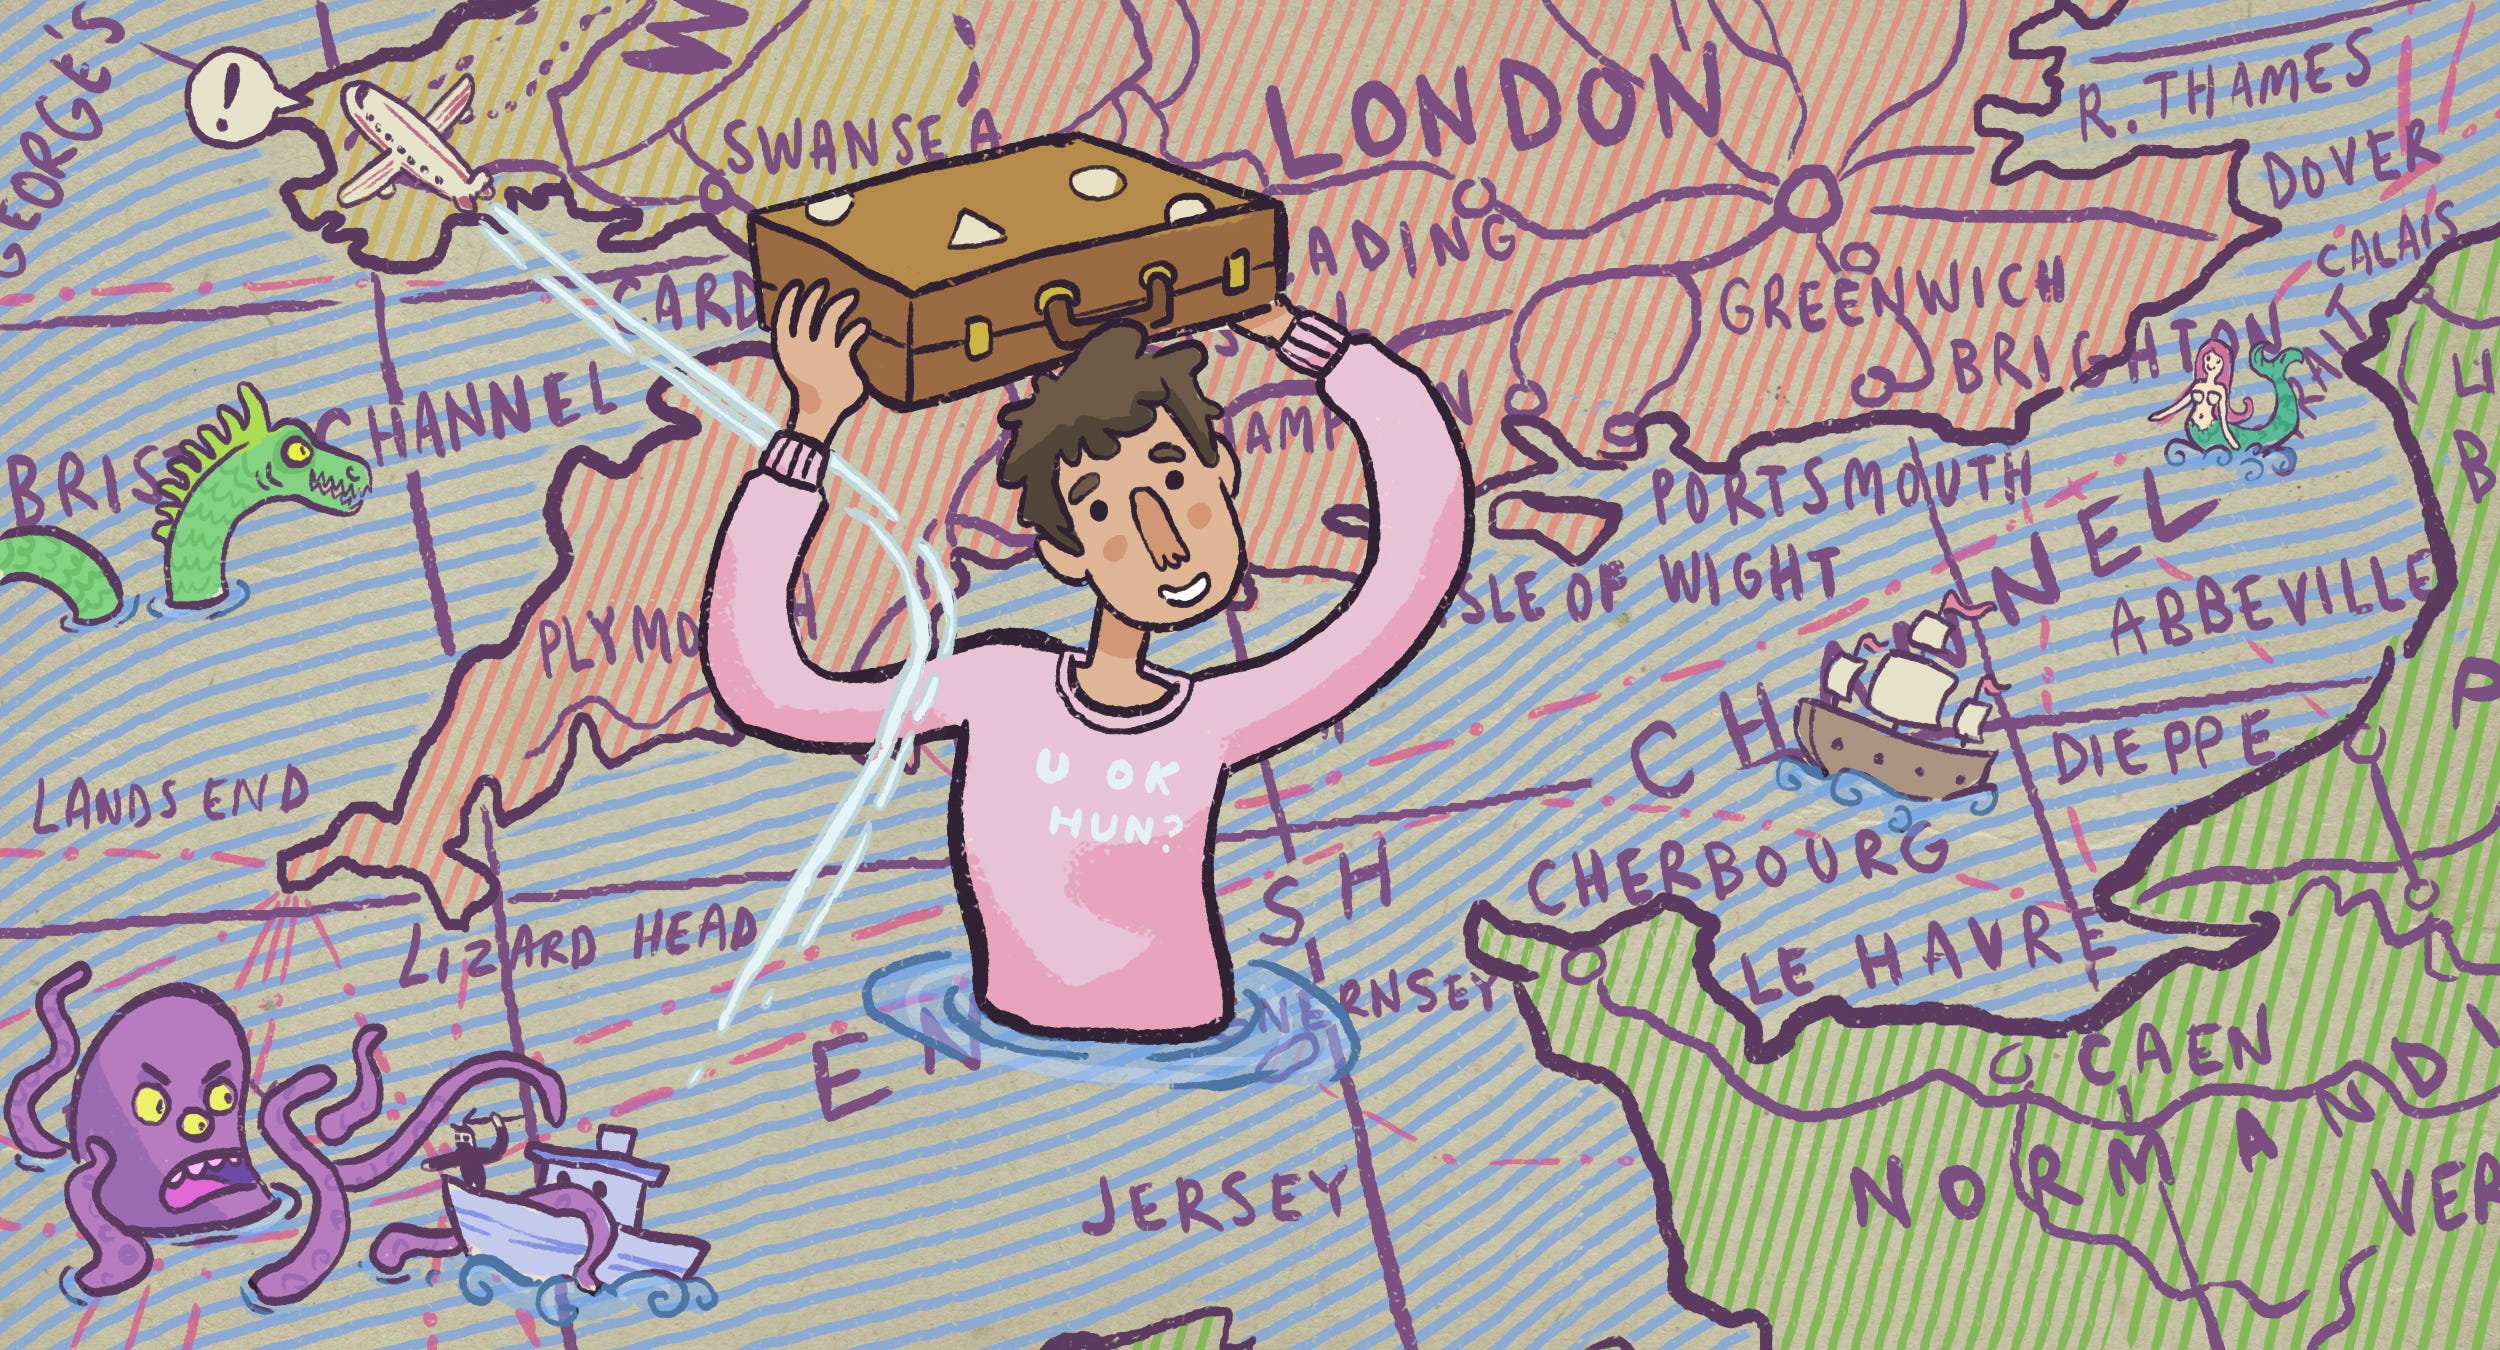 Illustration of a map with a man in the middle of the ocean with his lugagge above his head. His t-shirt says "u ok, hun?".